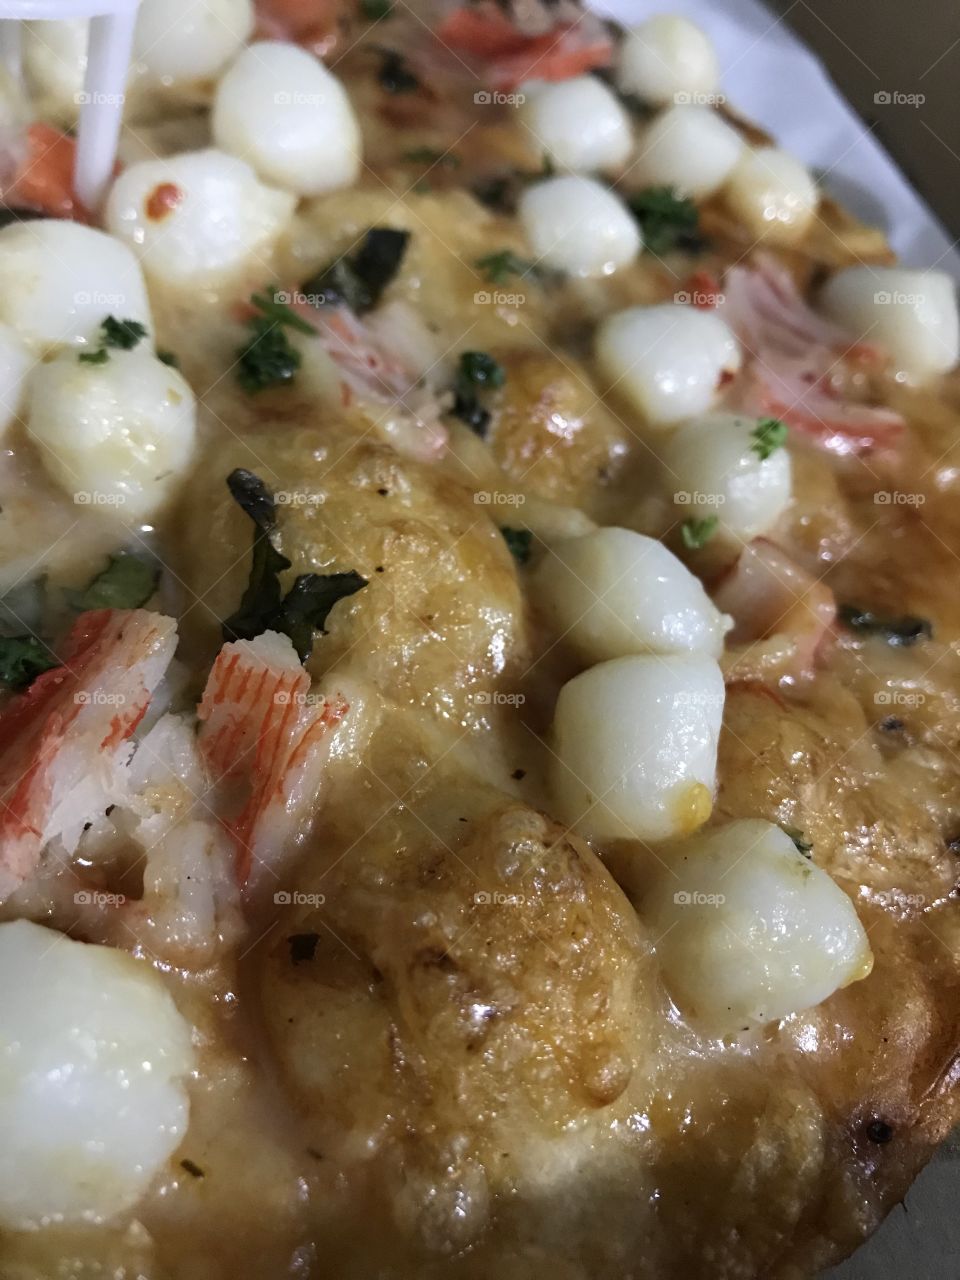 Pizza in a sea of shrimp and scallops. Yum!